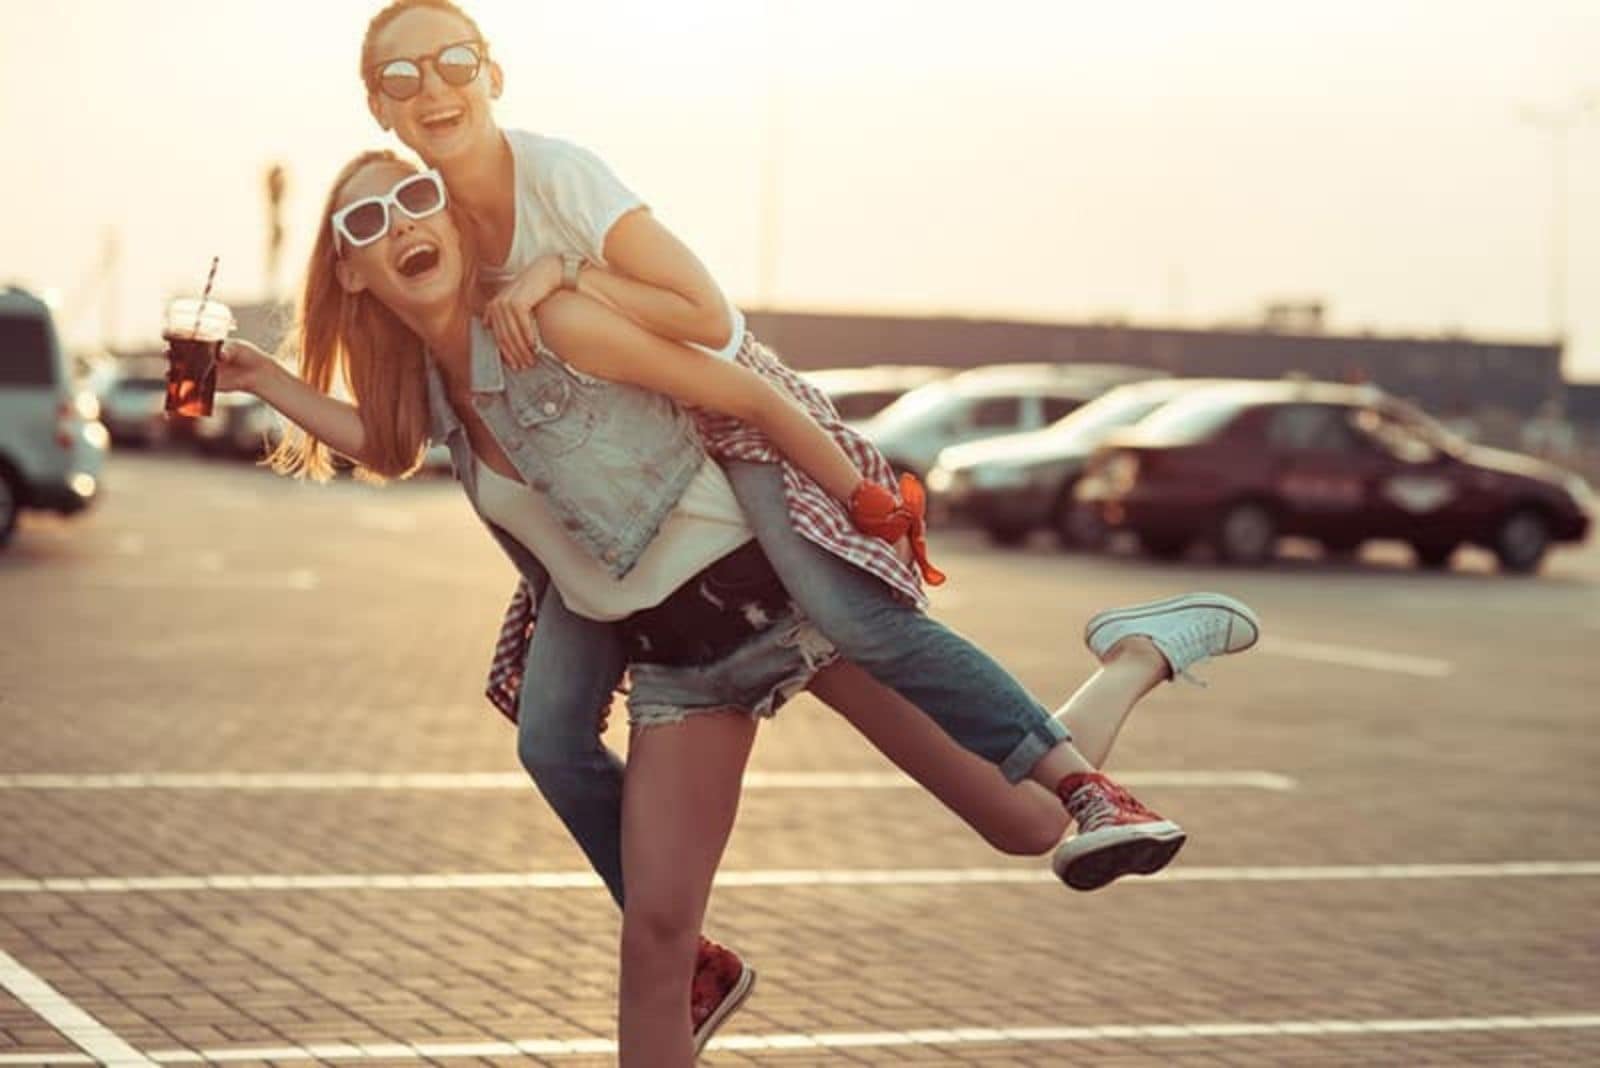 Qualities Of A Best Friend: 10 Essential Traits To Look For In A BFF